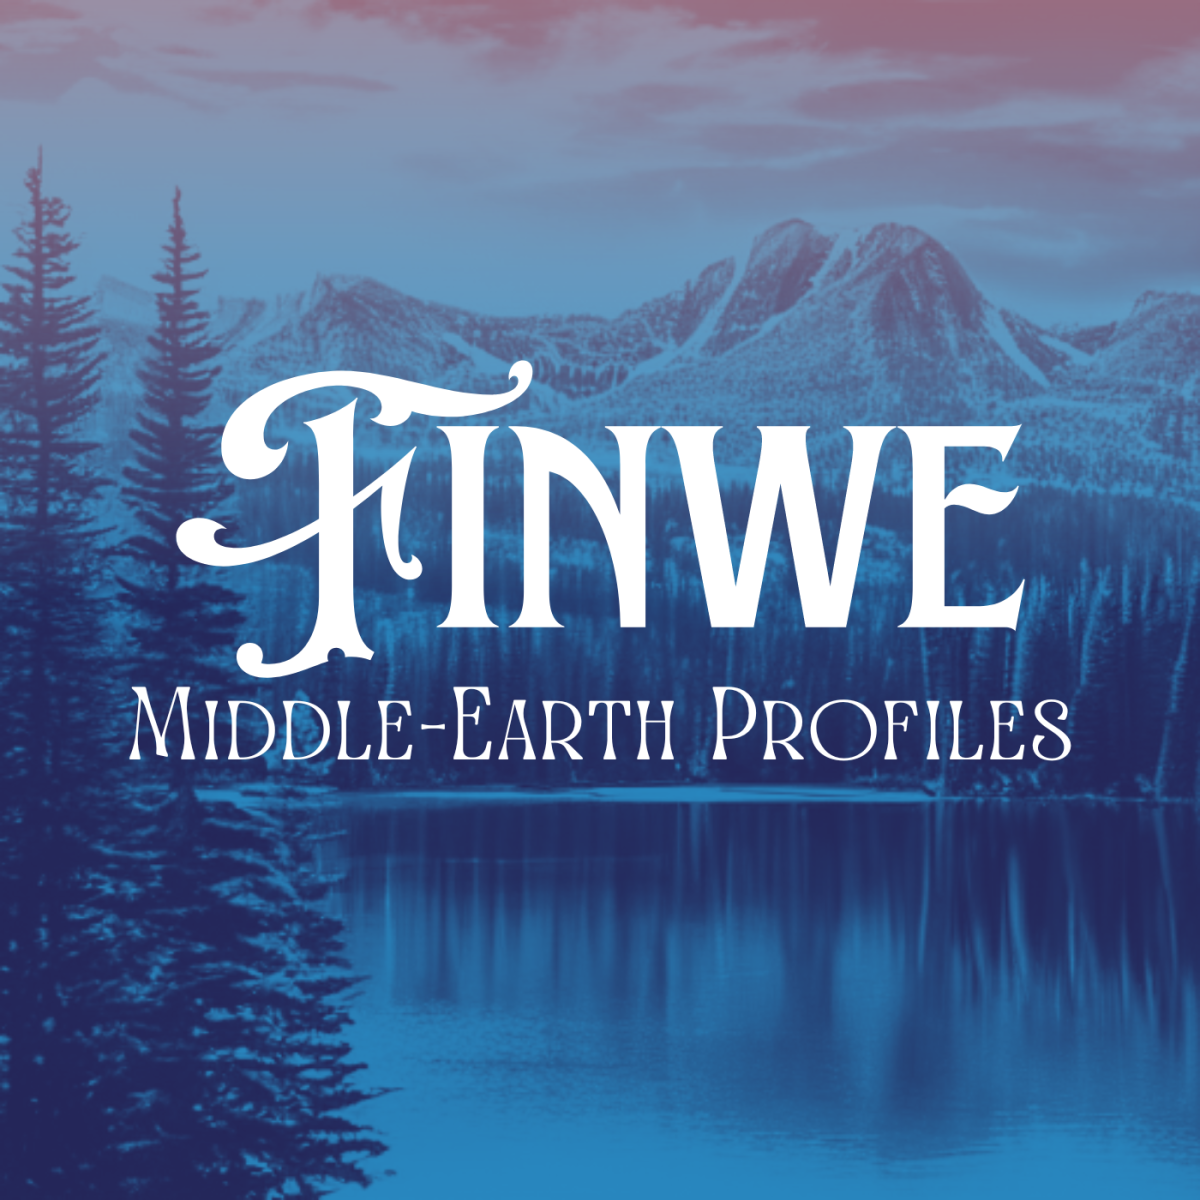 Middle-Earth Profiles: Finwe, First High King of the Noldor